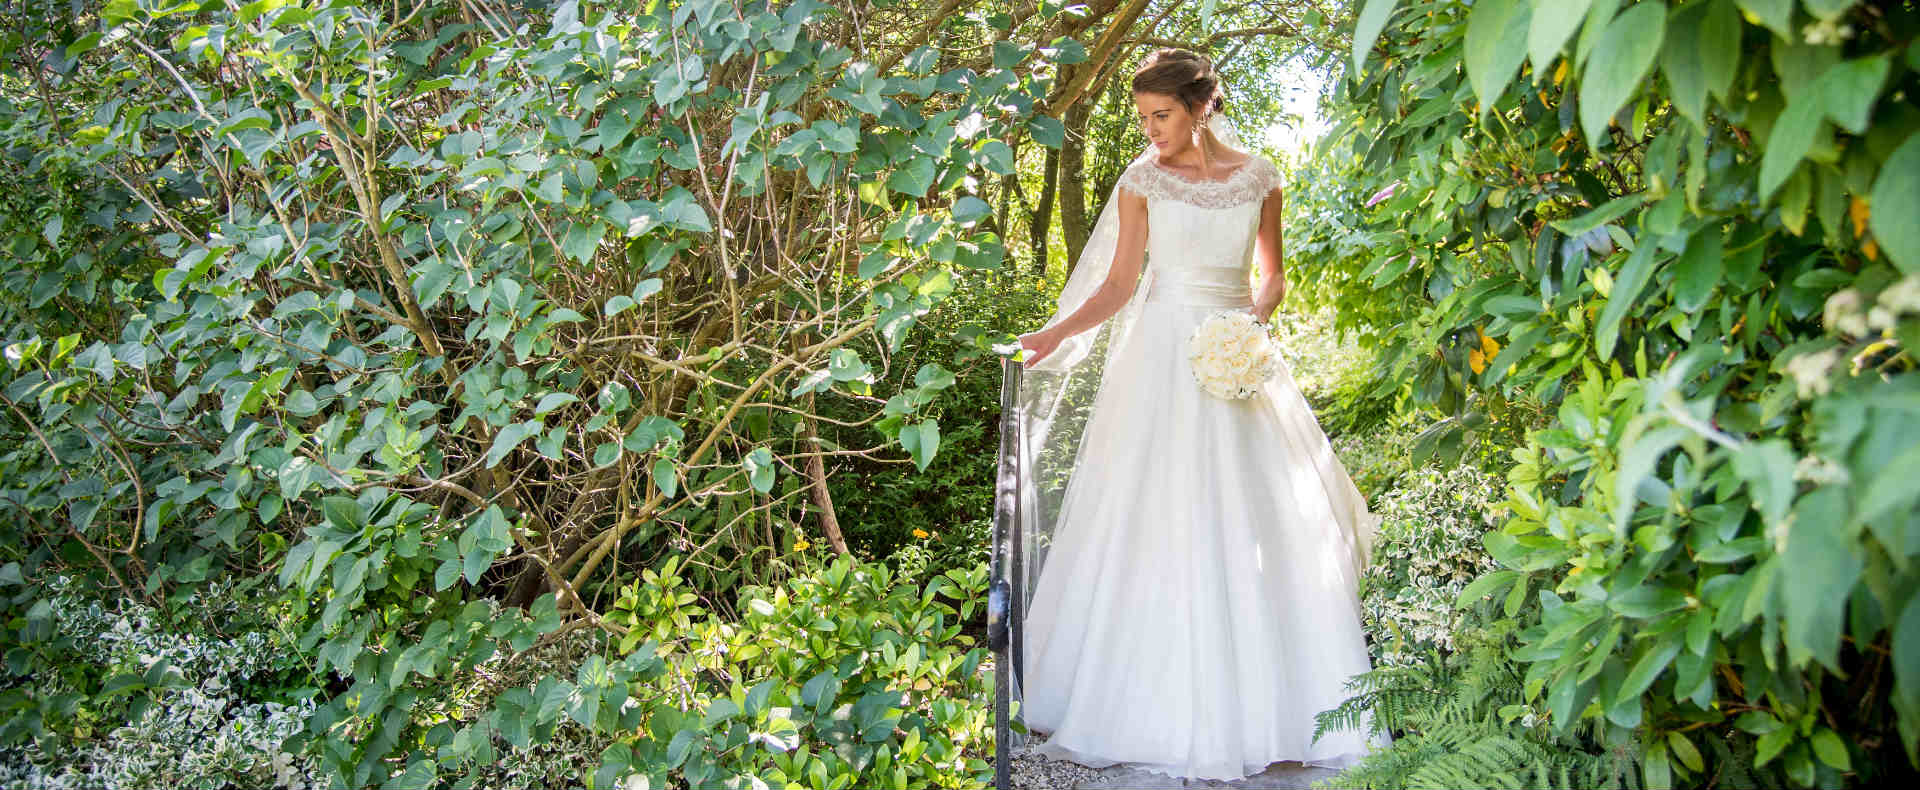 Small Wedding Venues |Intimate Weddings At The Montagu Arms Hotel